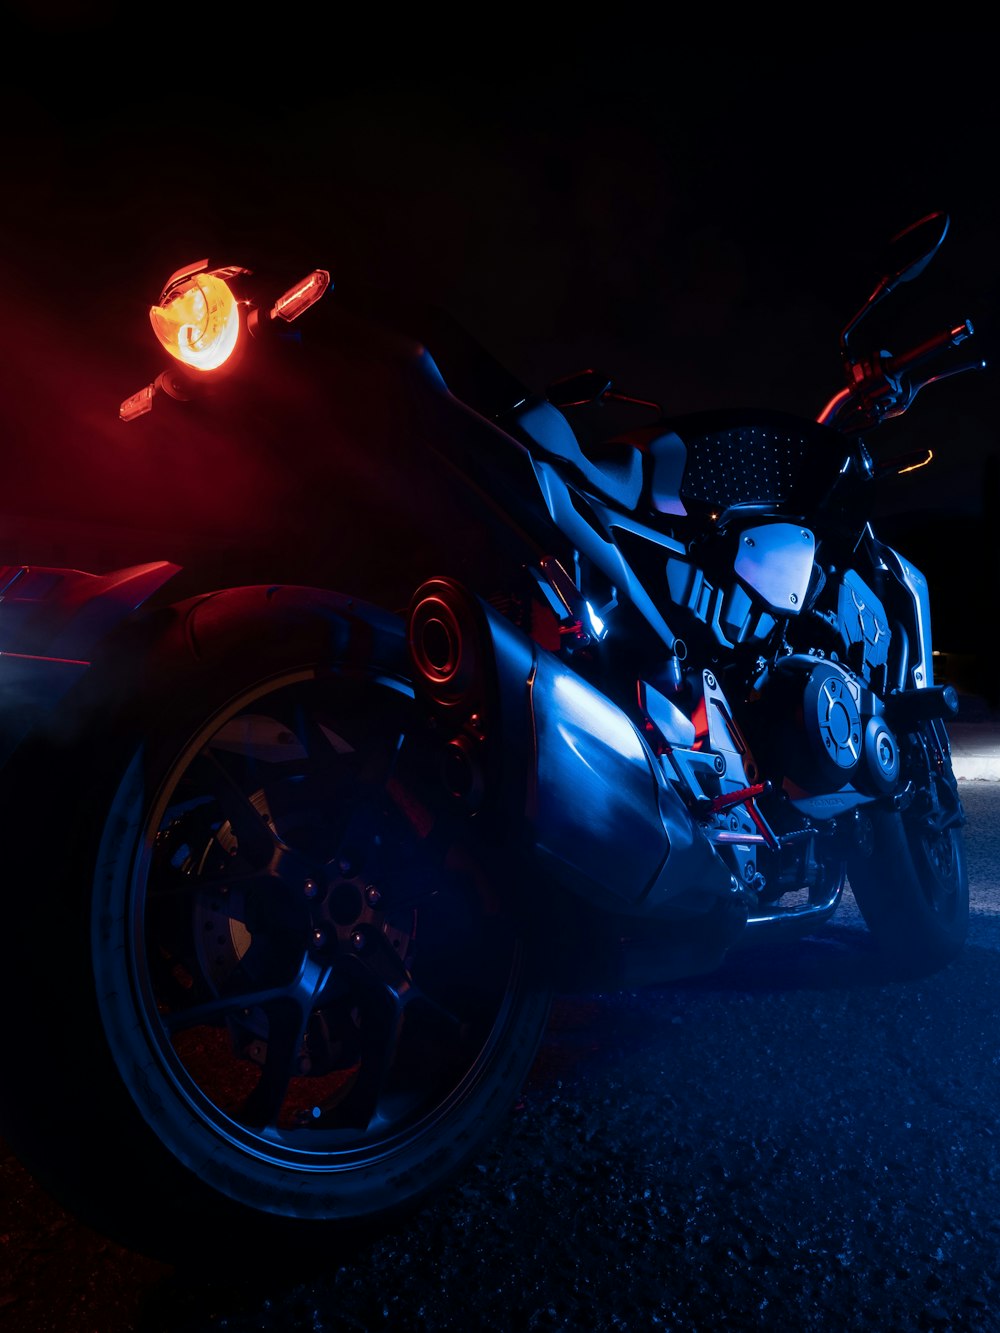 low-light photography of motorcycle